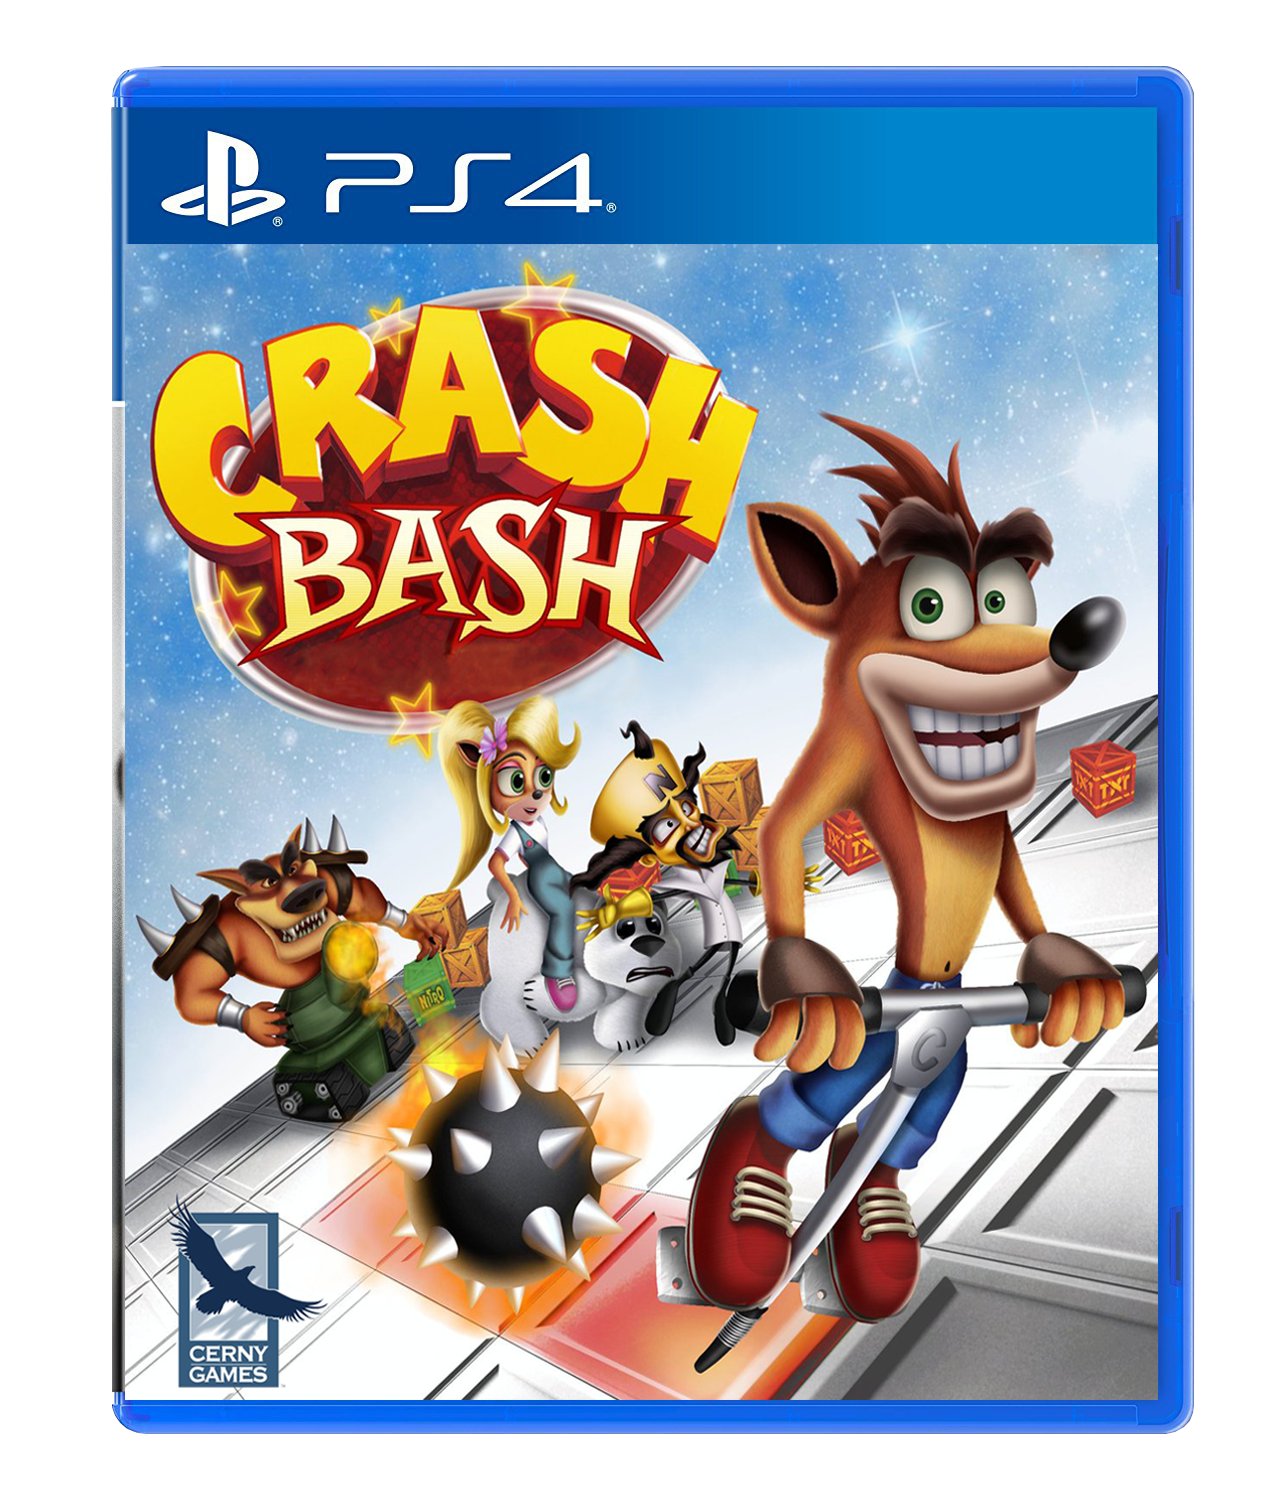 Carlos L Gutierrez on X: "@LimitedRunGames @IamCern How about Crash Bash  adapted for PS4? (Not remastered) #CrashBash Going back to those days of  endless fun with your friends. https://t.co/OJKHNek2o5" / X